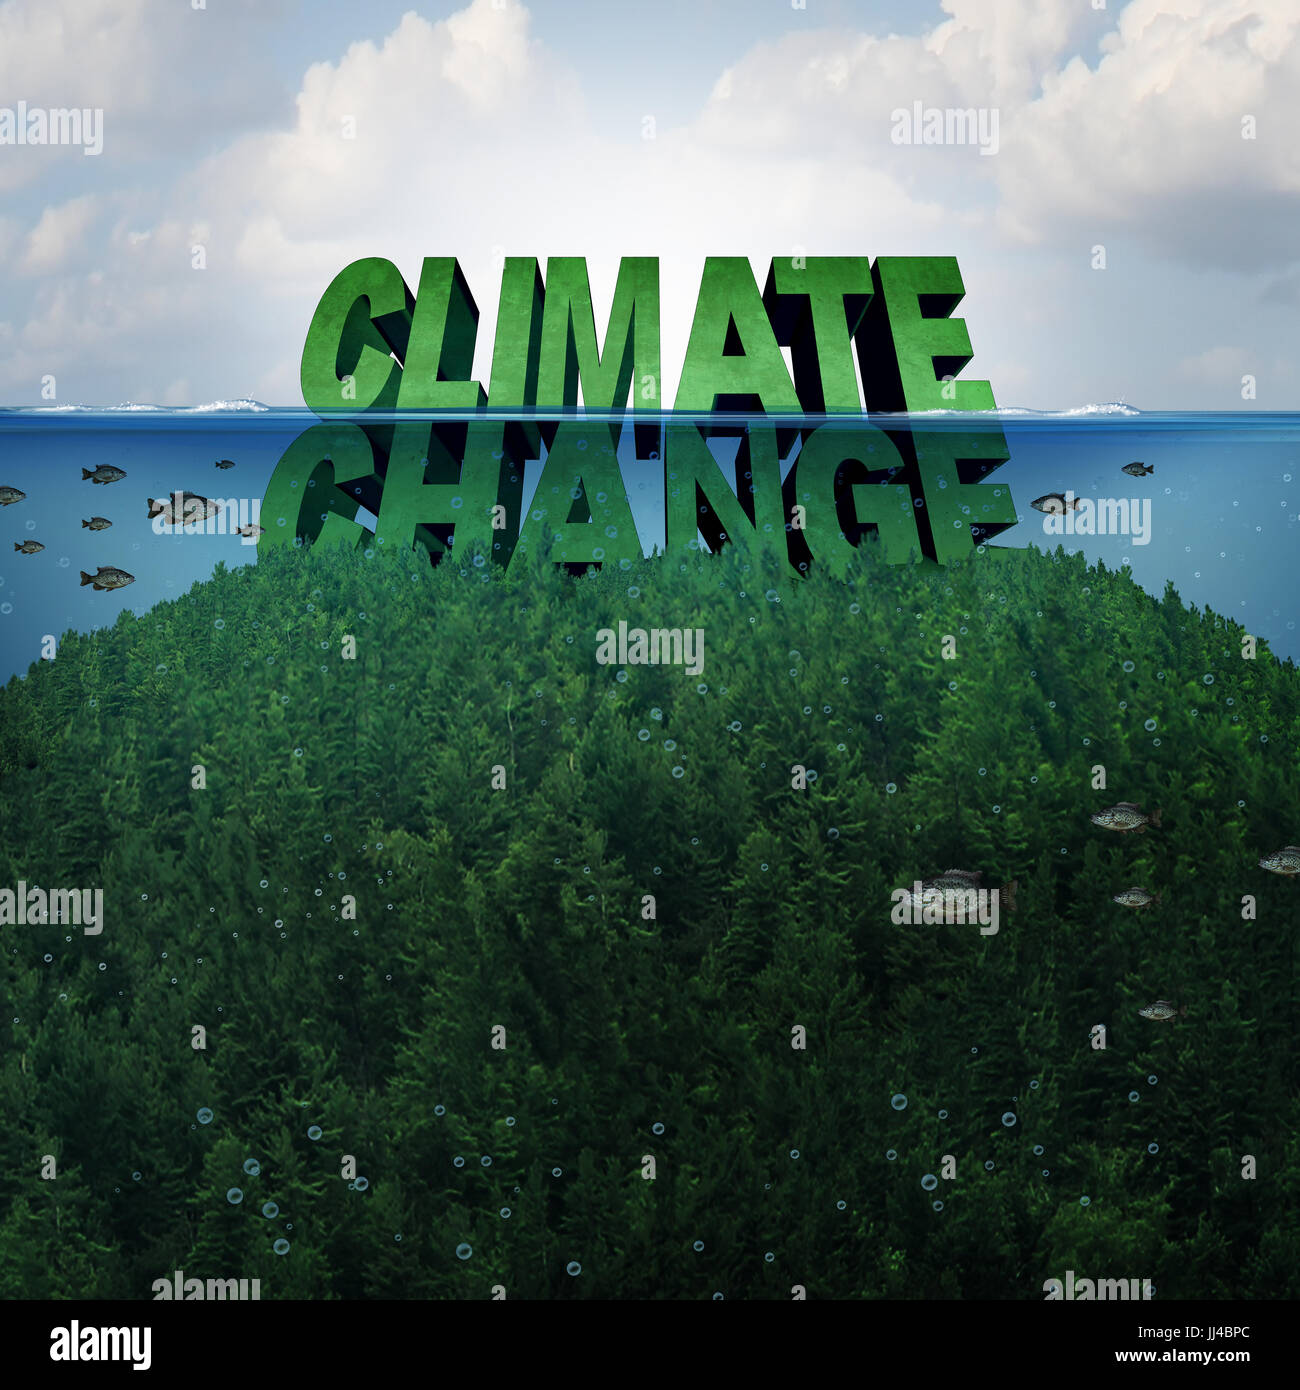 Climate change and extreme weather conditions concept and rising sea levels due to global warming and melting of the polar ice caps. Stock Photo